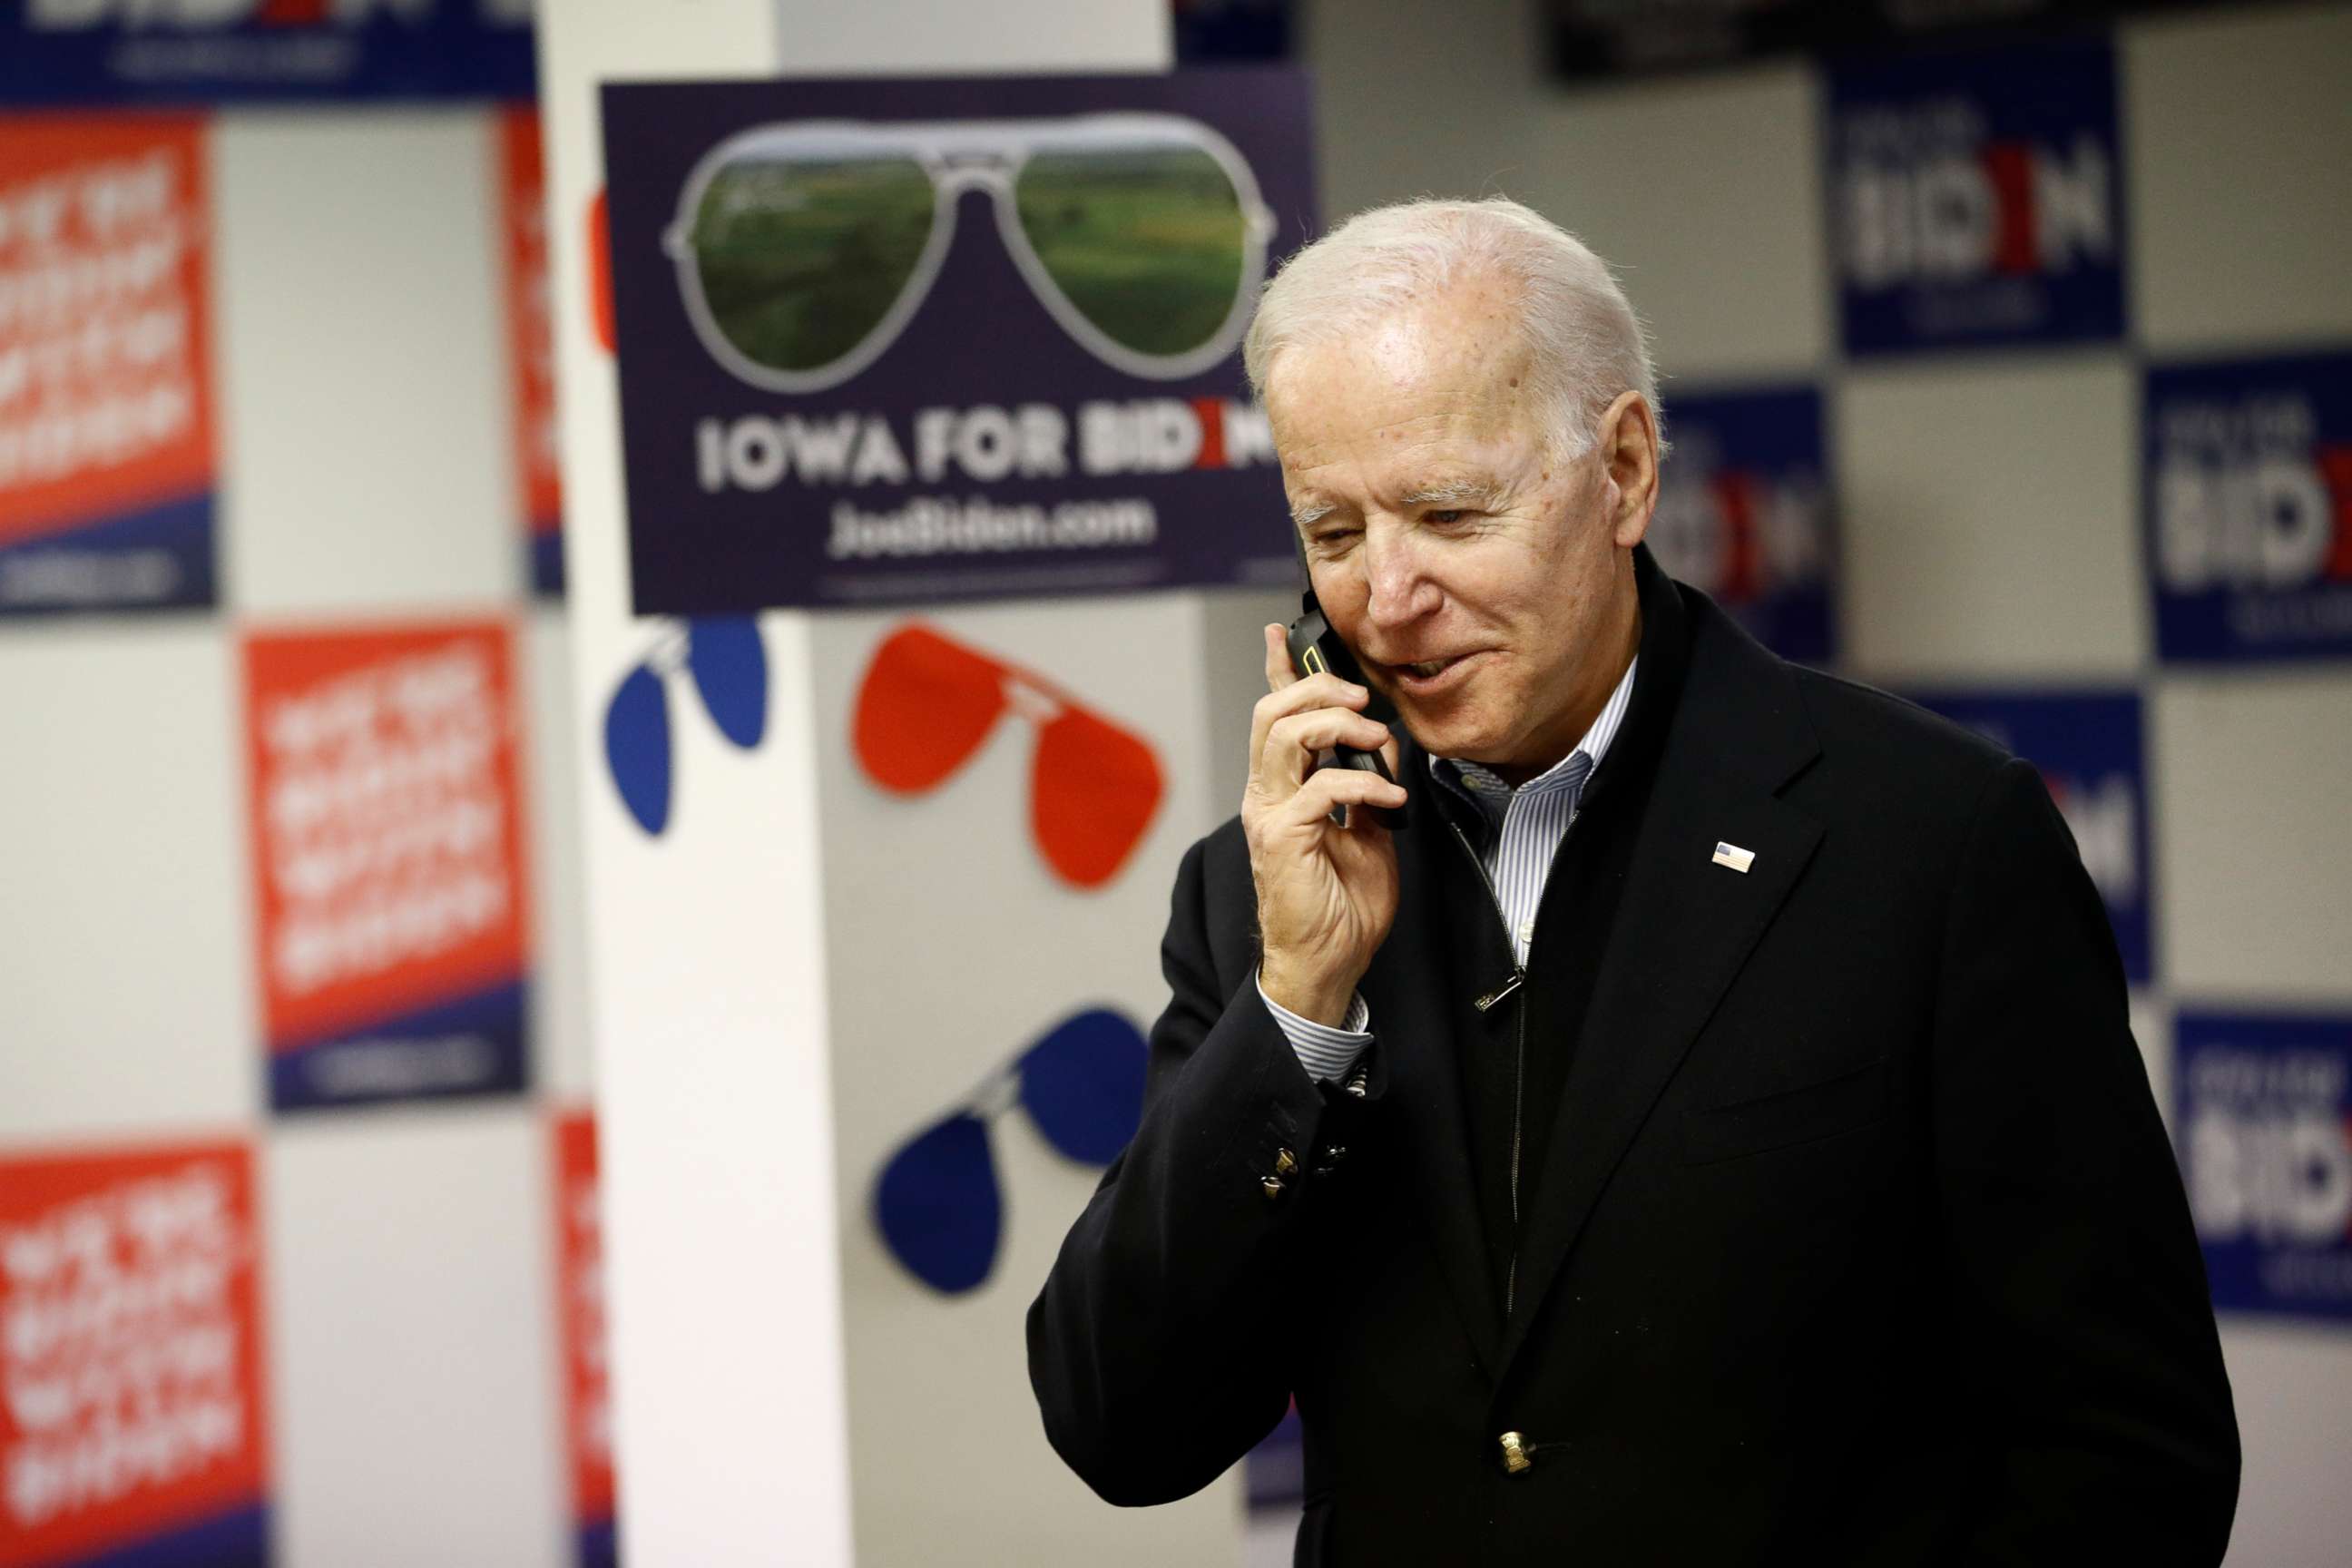 PHOTO: Democratic presidential candidate former Vice President Joe Biden speaks with a potential caucus-goer during a stop at a campaign field office, Monday, Jan. 13, 2020, in Des Moines, Iowa.